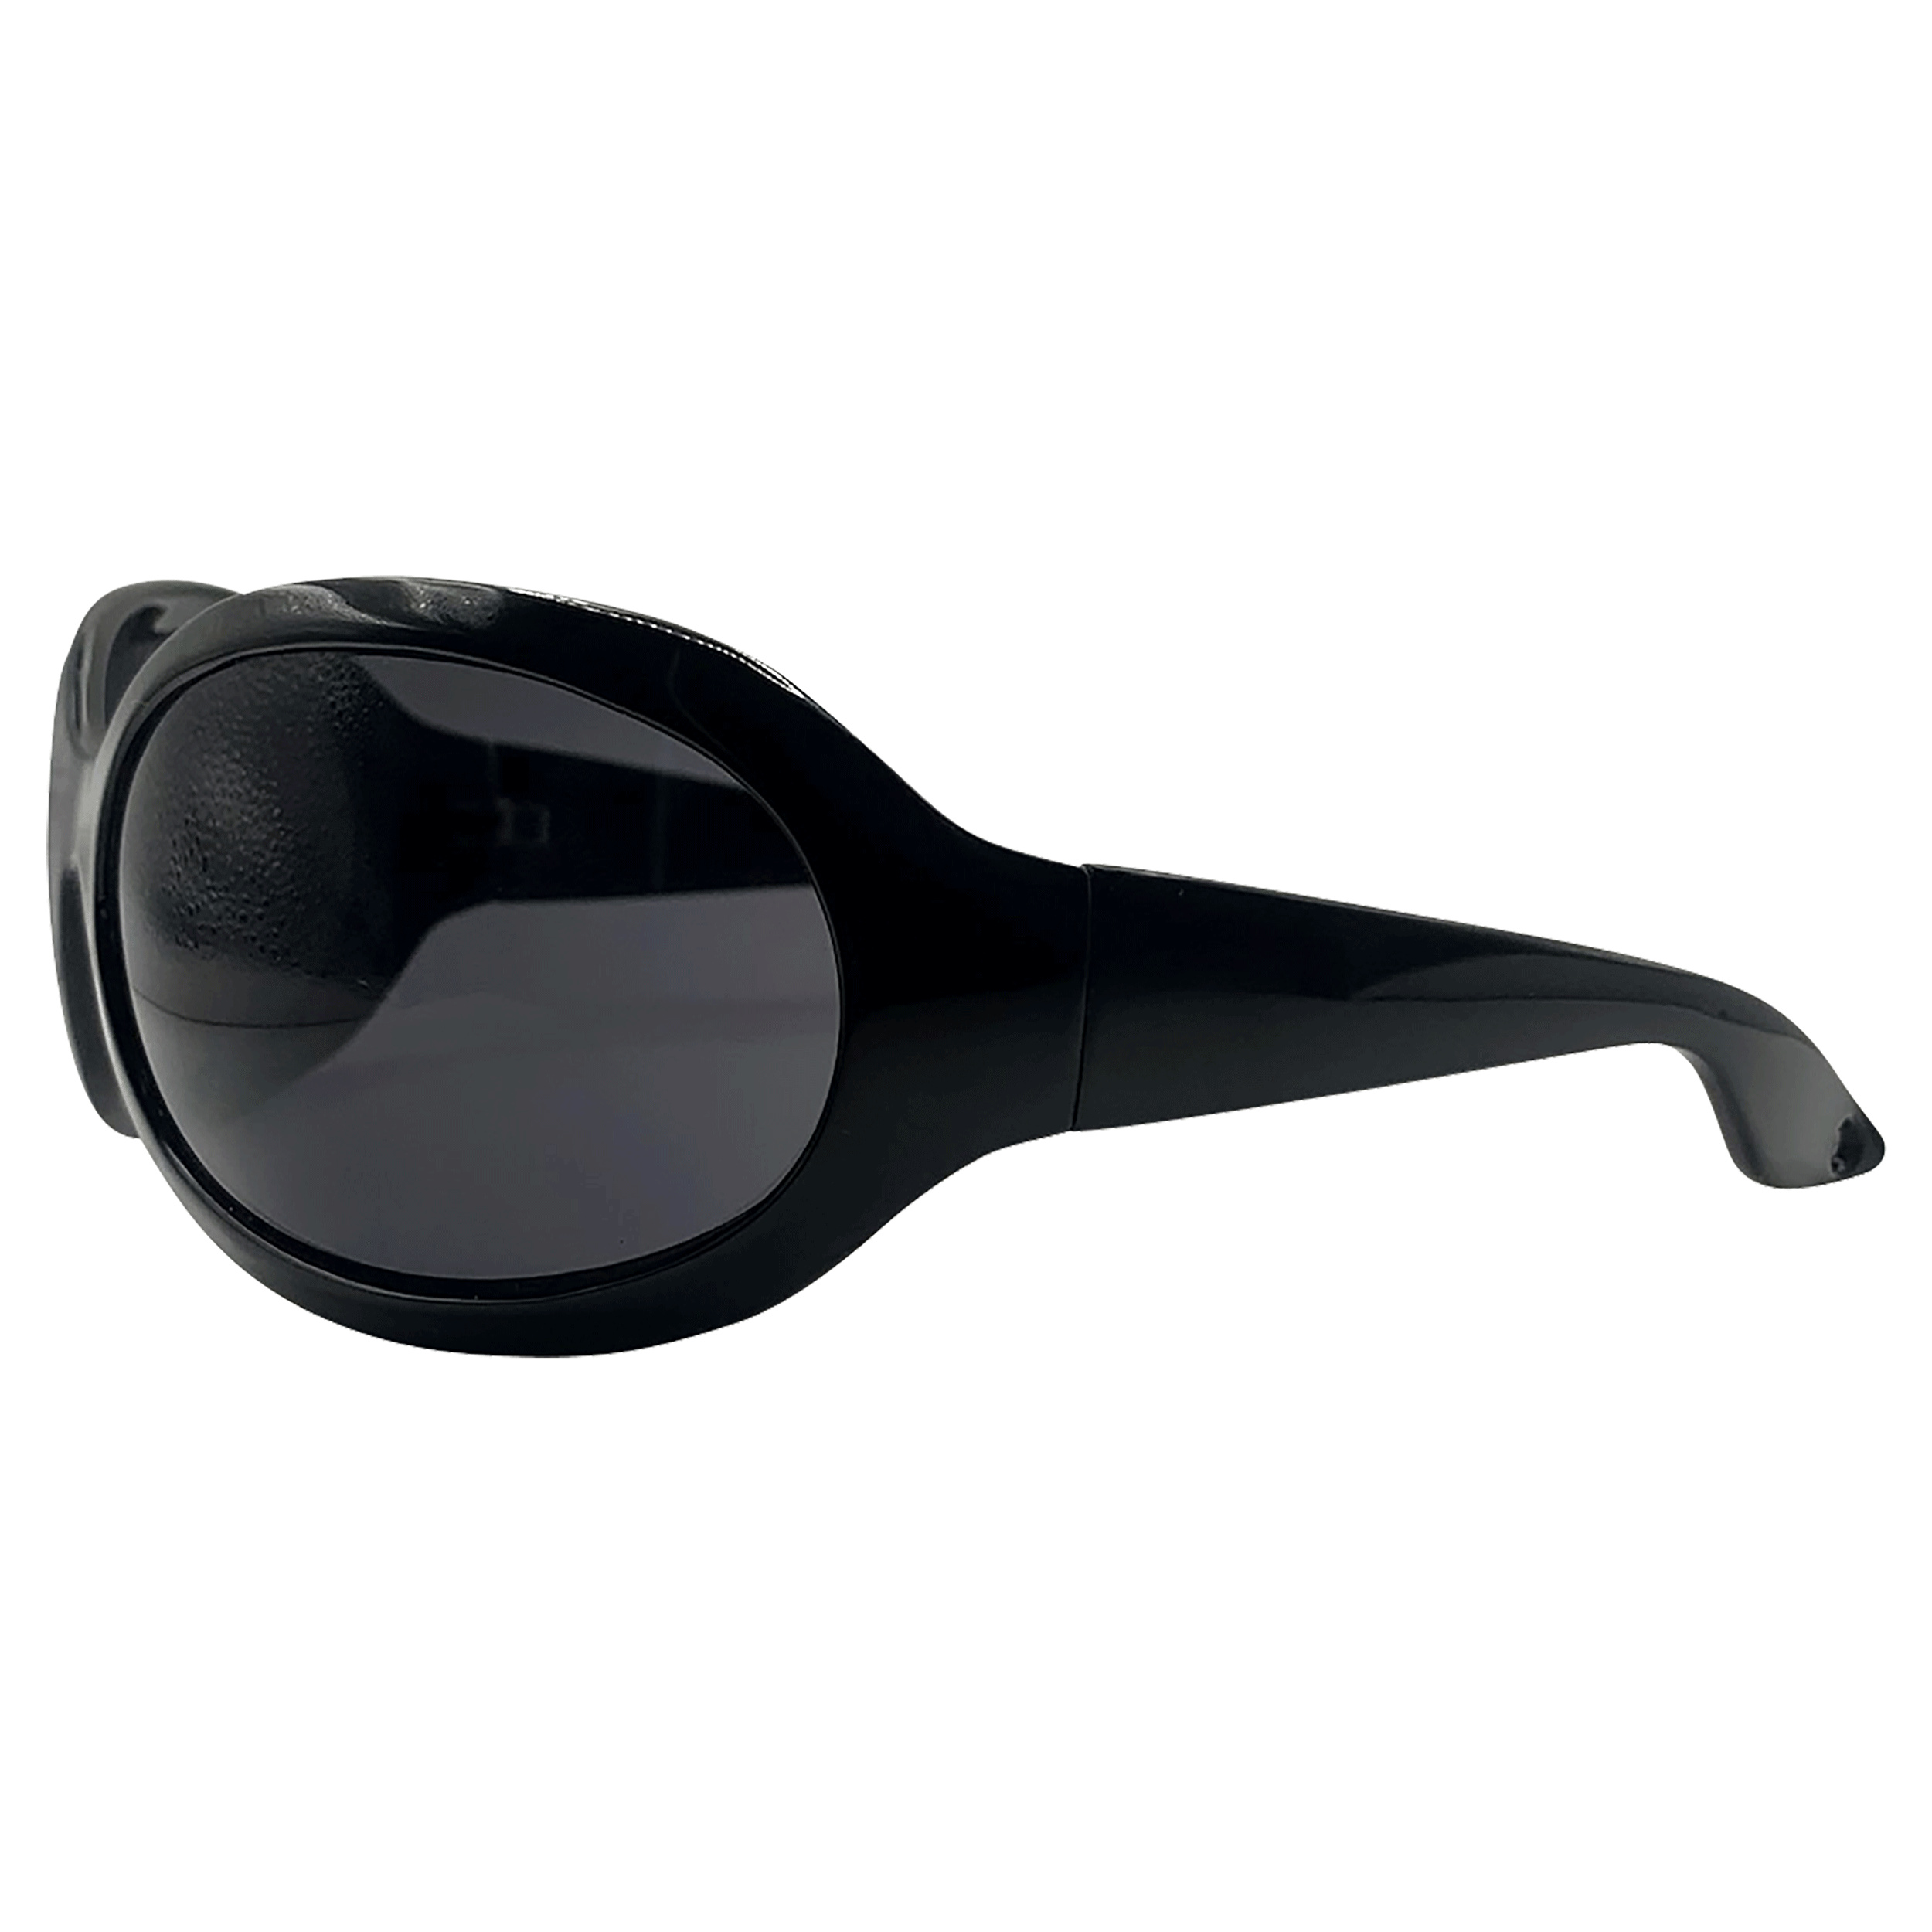 FIFTY SEVEN 90s Oversized Sunglasses